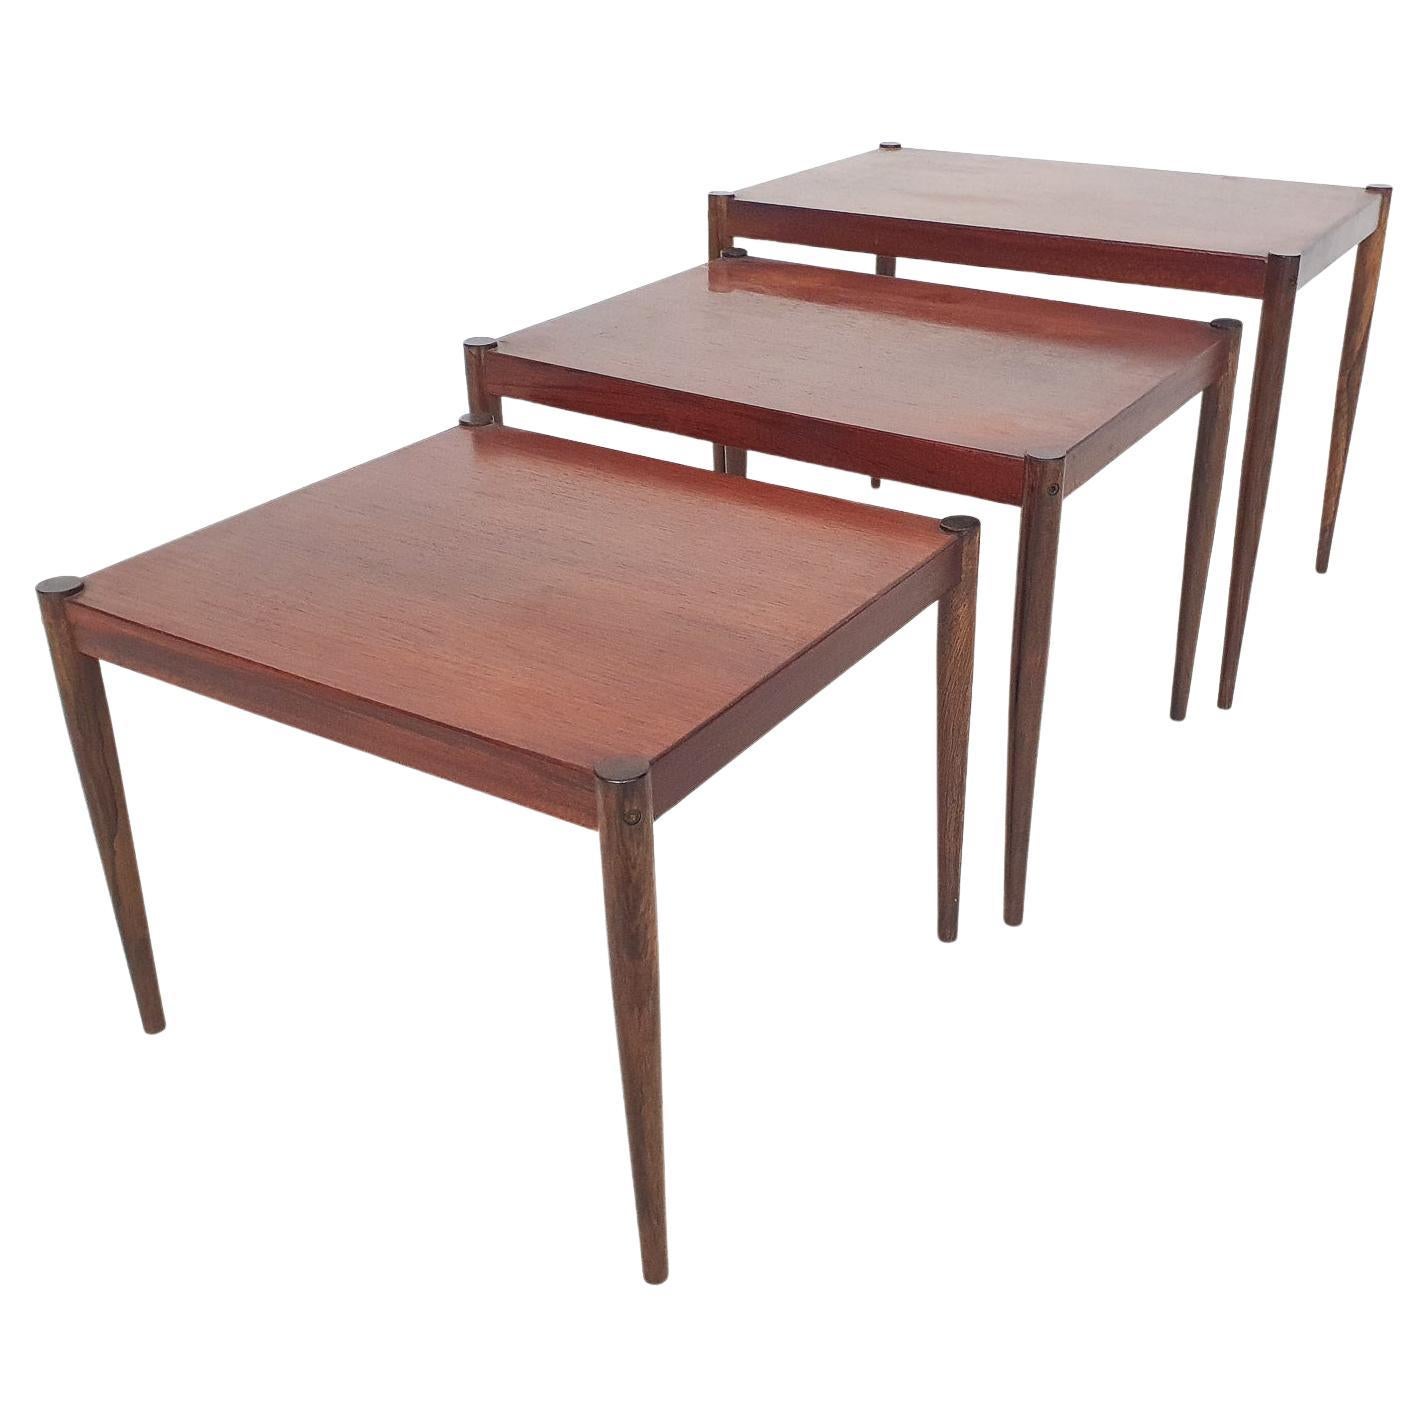 Mid-Century Wooden Nesting Tables, The Netherlands, 1950's For Sale